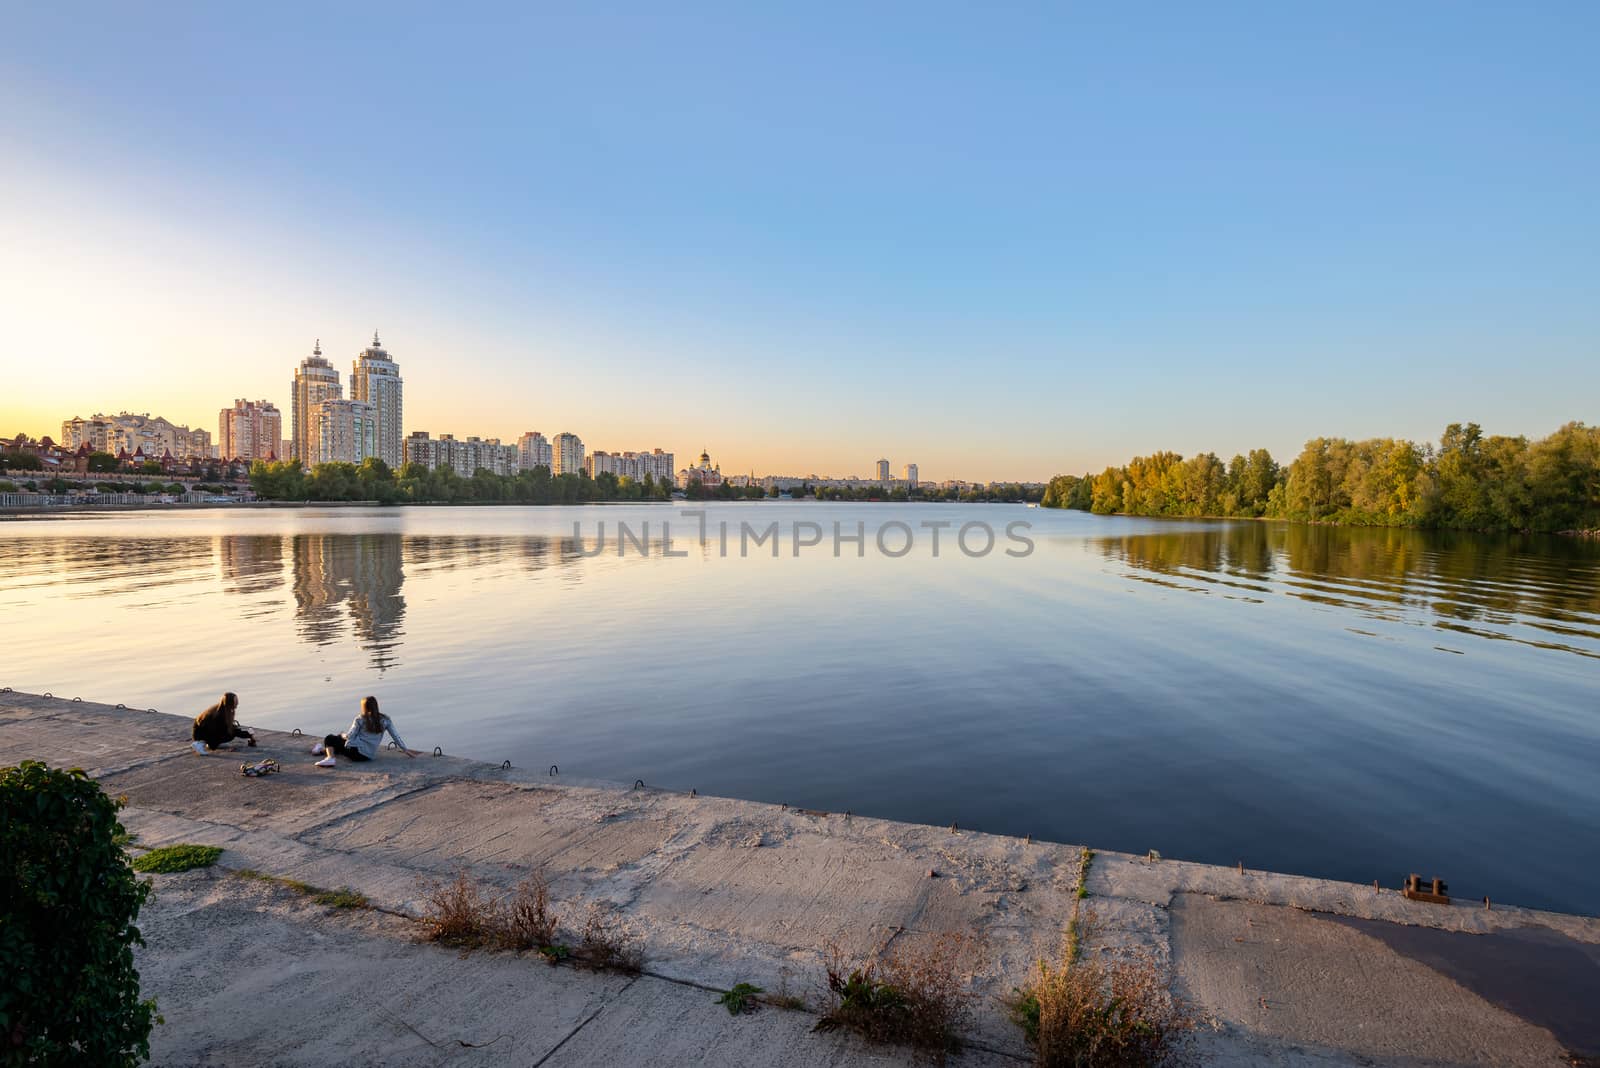 Kiev / Ukraine - September 22, 2020 - Two girls on the embankment close to the high Obolon buildings near the Dnieper river in Kiev, Ukraine. Blue clear sky and reflection in the water.